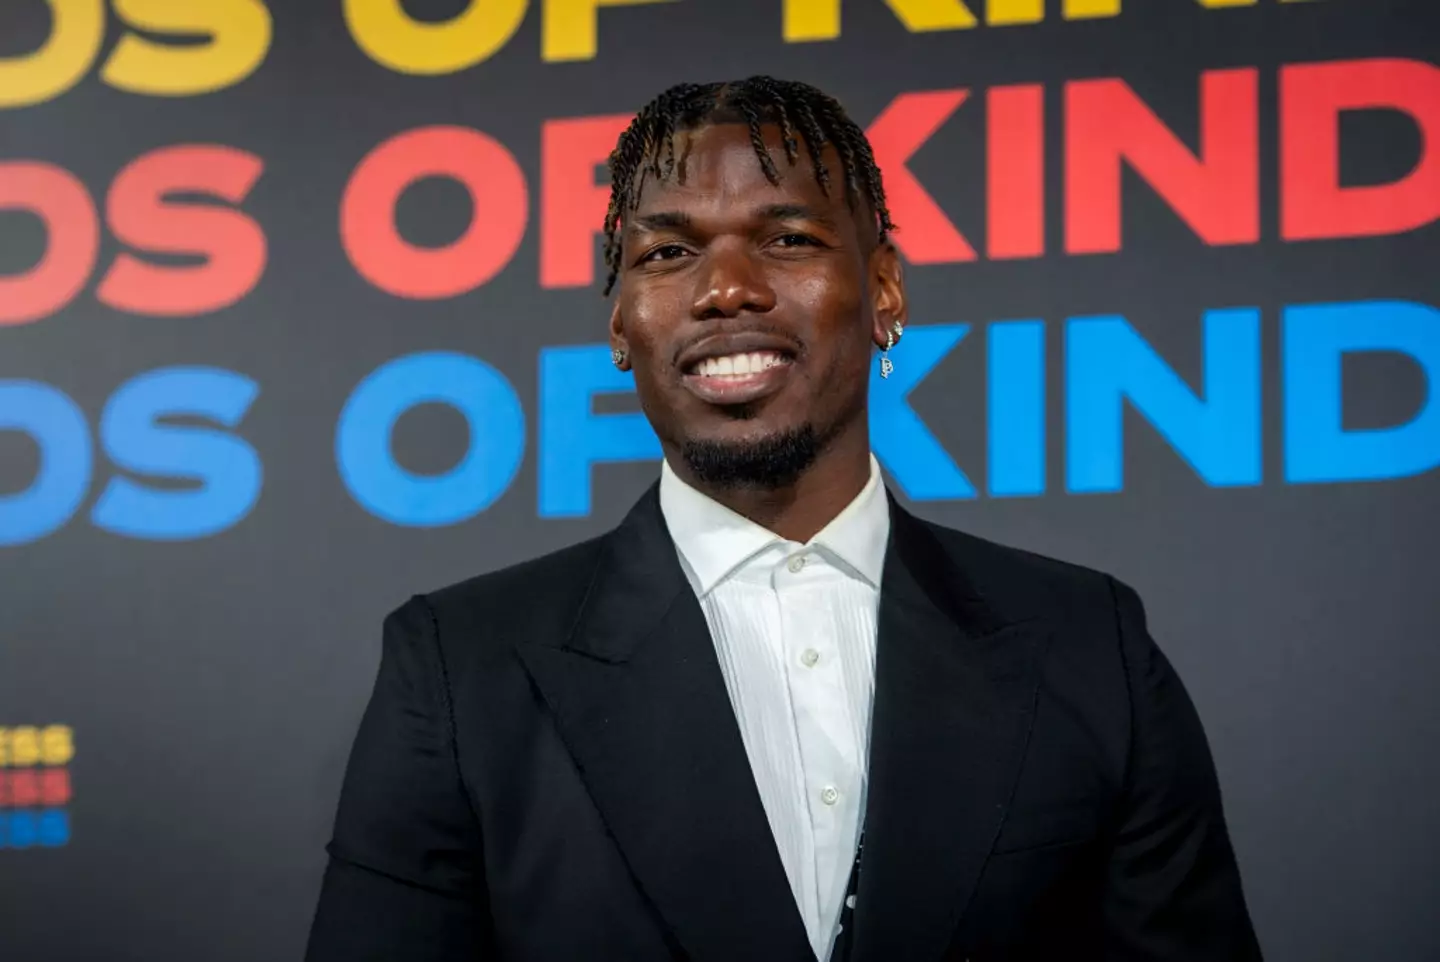 Paul Pogba is currently serving a four-year ban from football (Image: Getty)